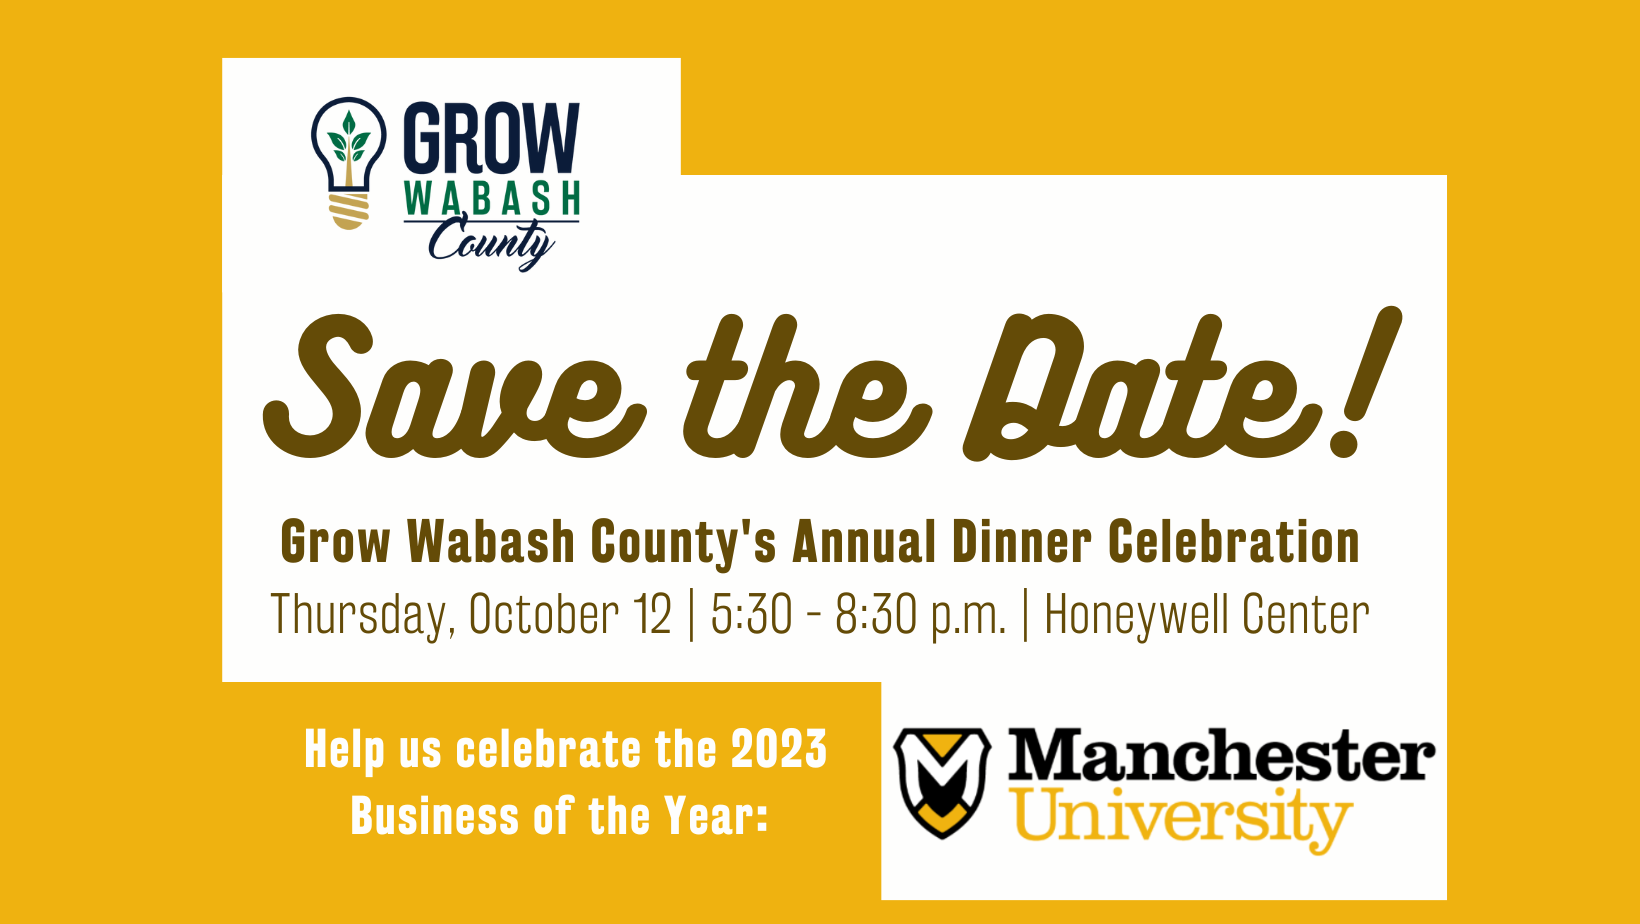 Manchester University to be recognized as 2023 Business of the Year Photo